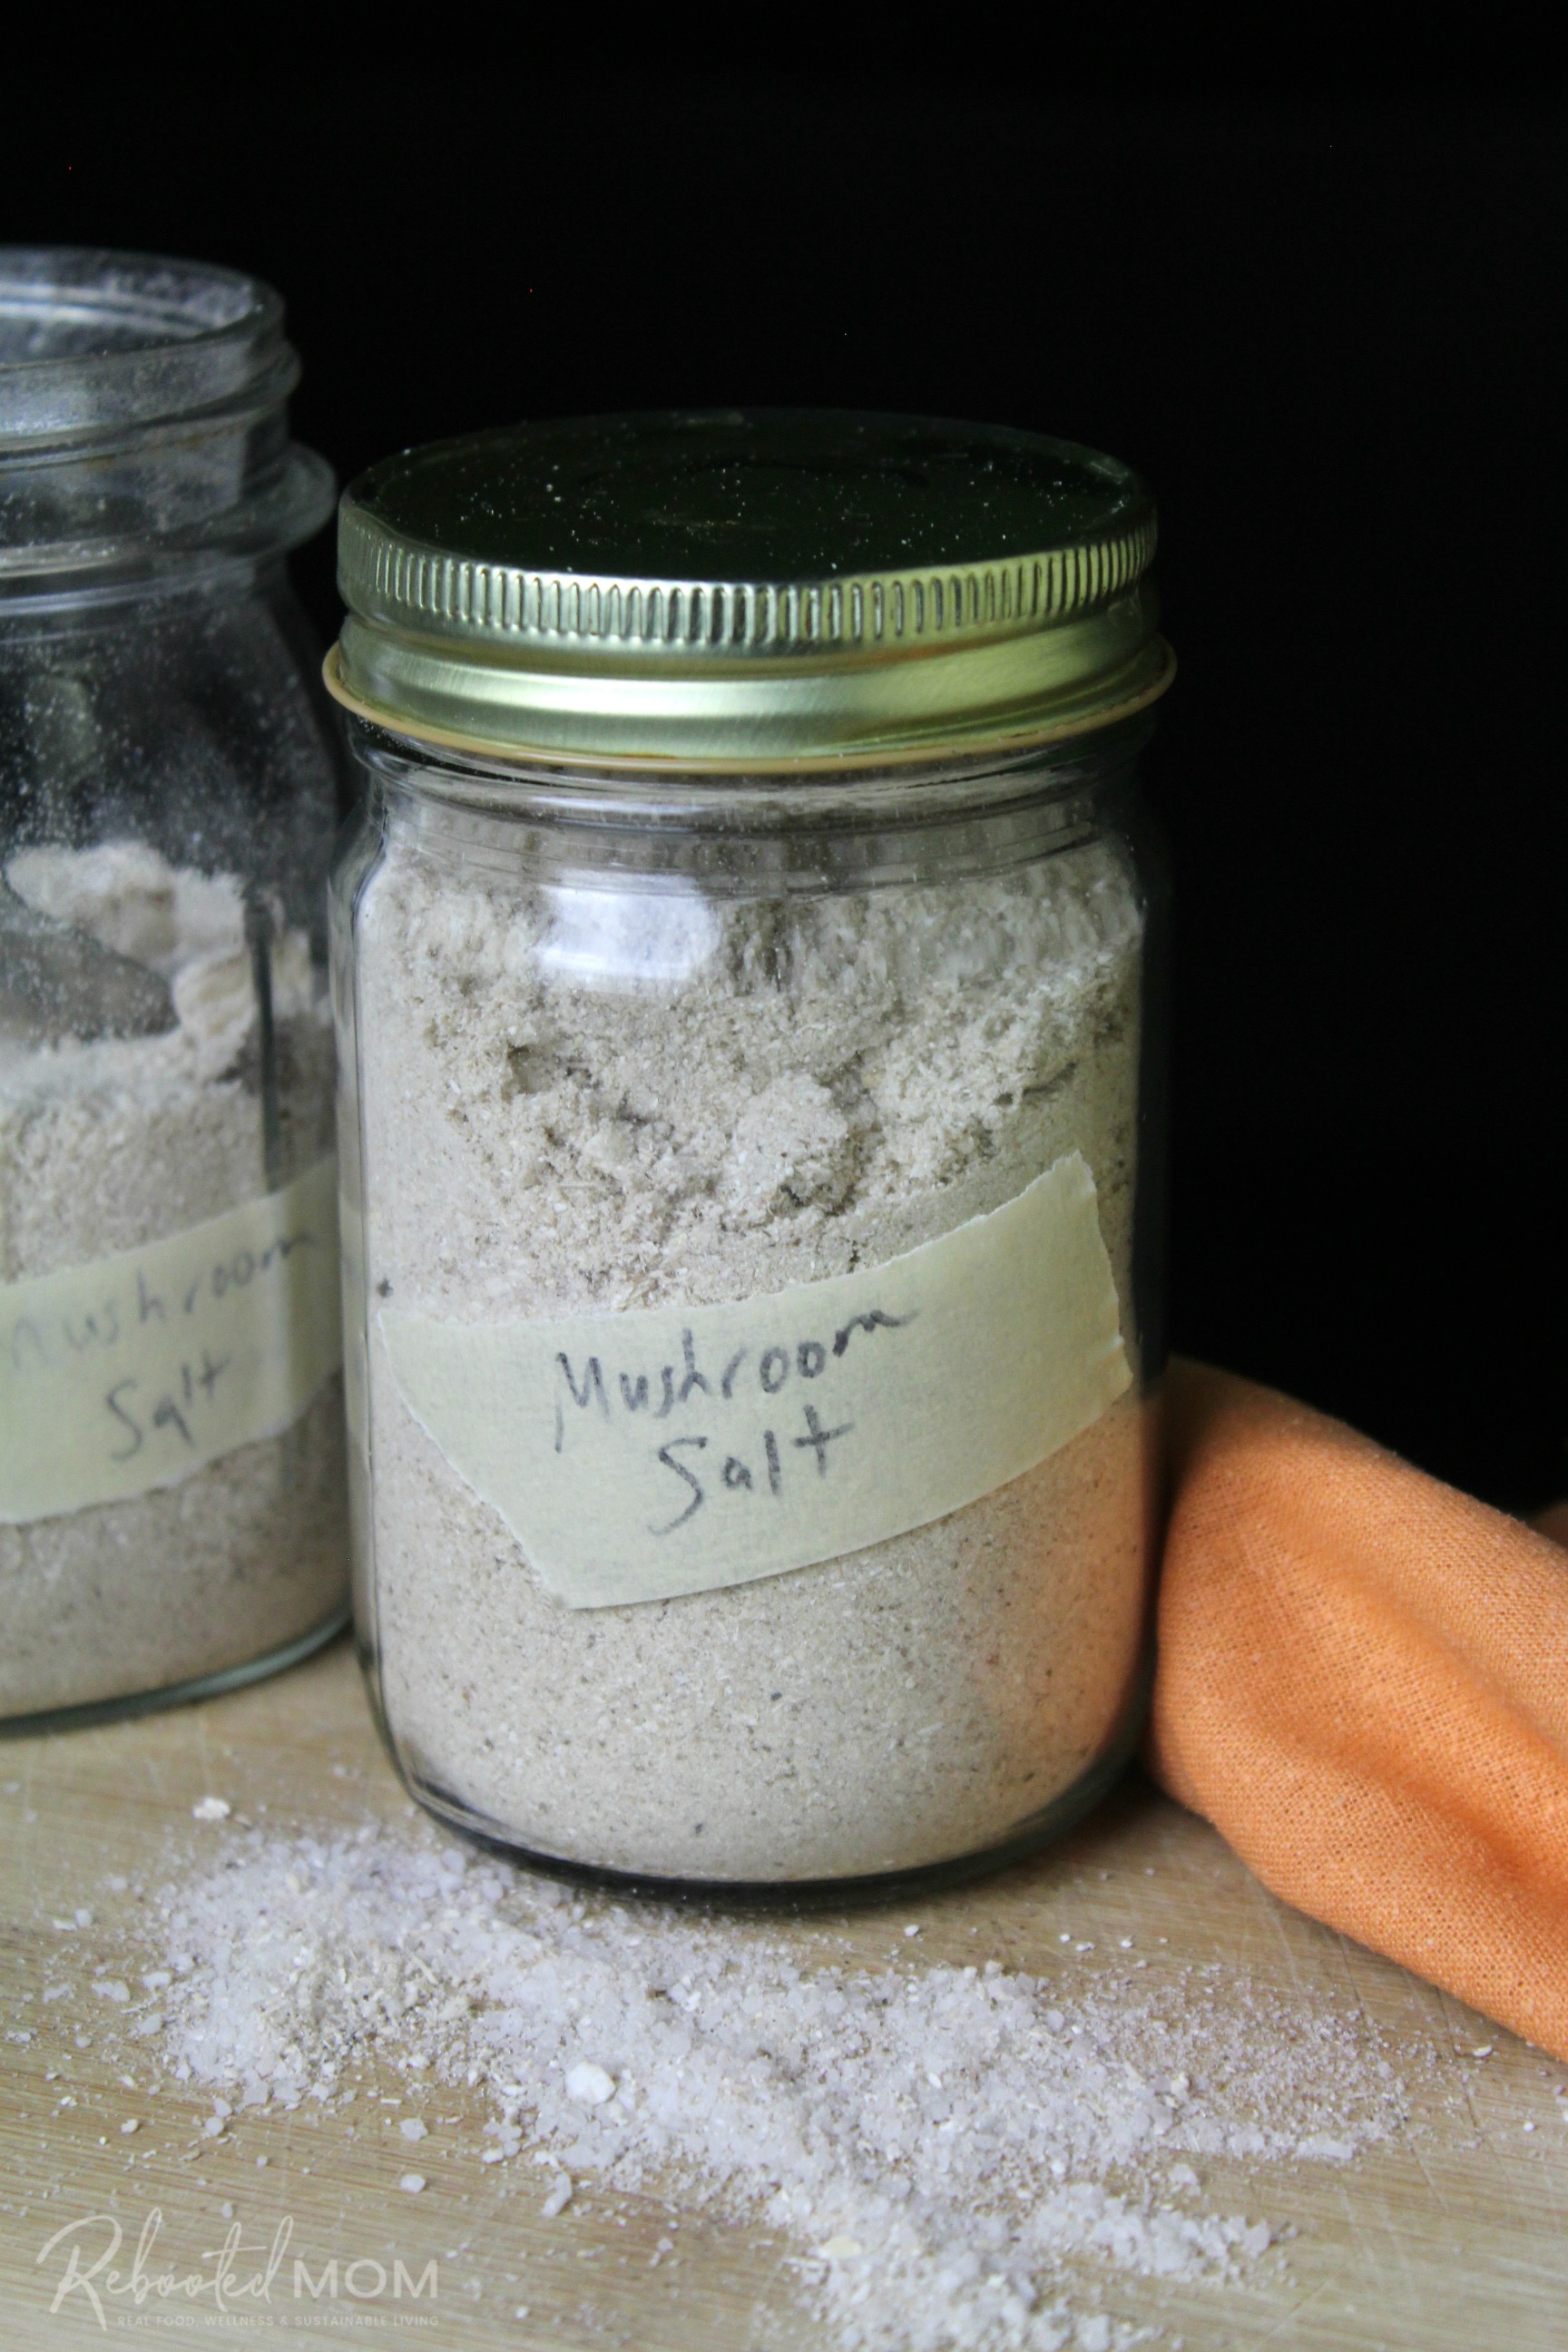 This mushroom salt is simple to make and delicious on everything from roasted veggies to steak, chicken and so much more!